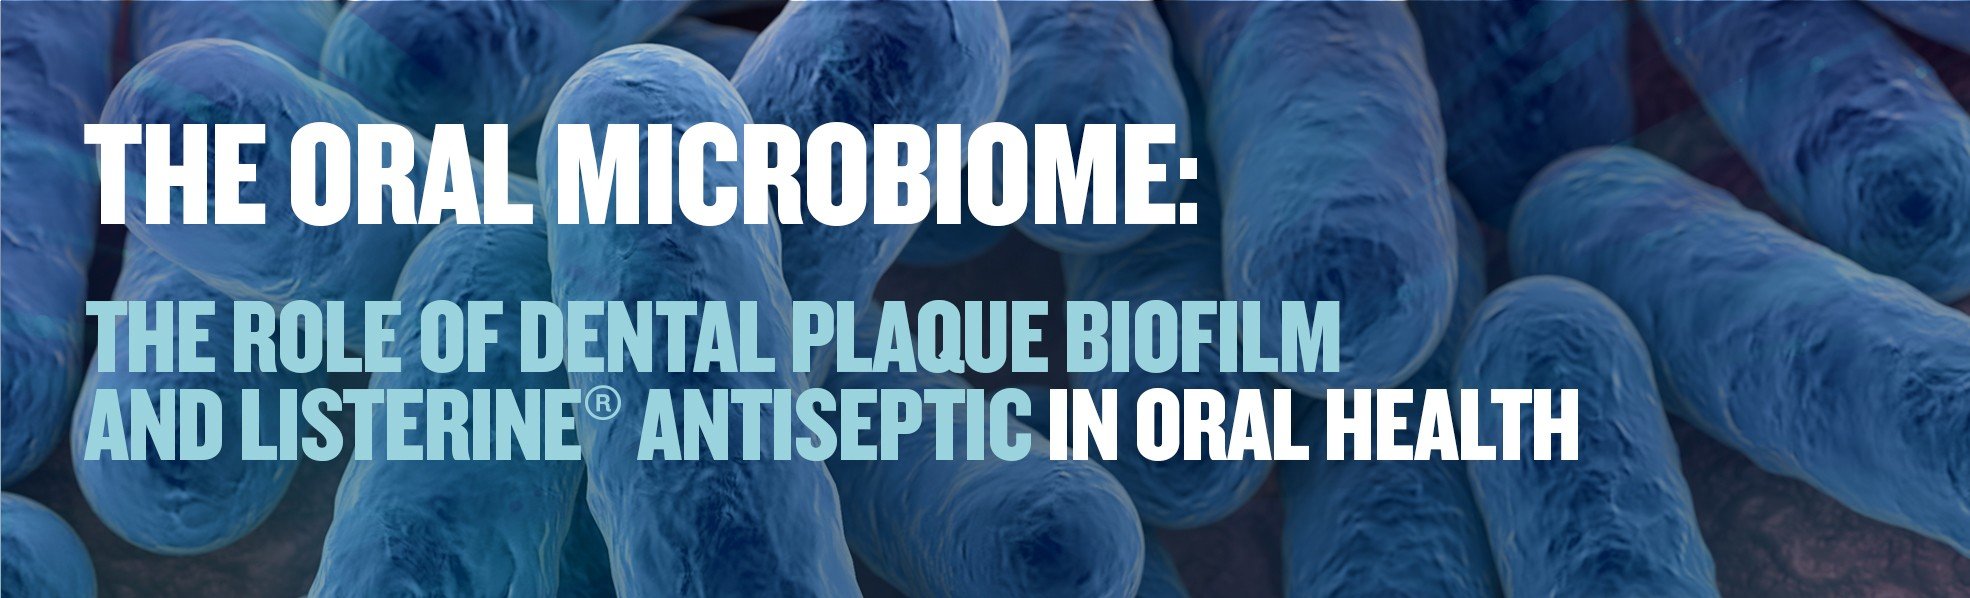 Exploring the oral microbiome and the role of dental plaque biofilm and Listerine Antiseptic in oral health